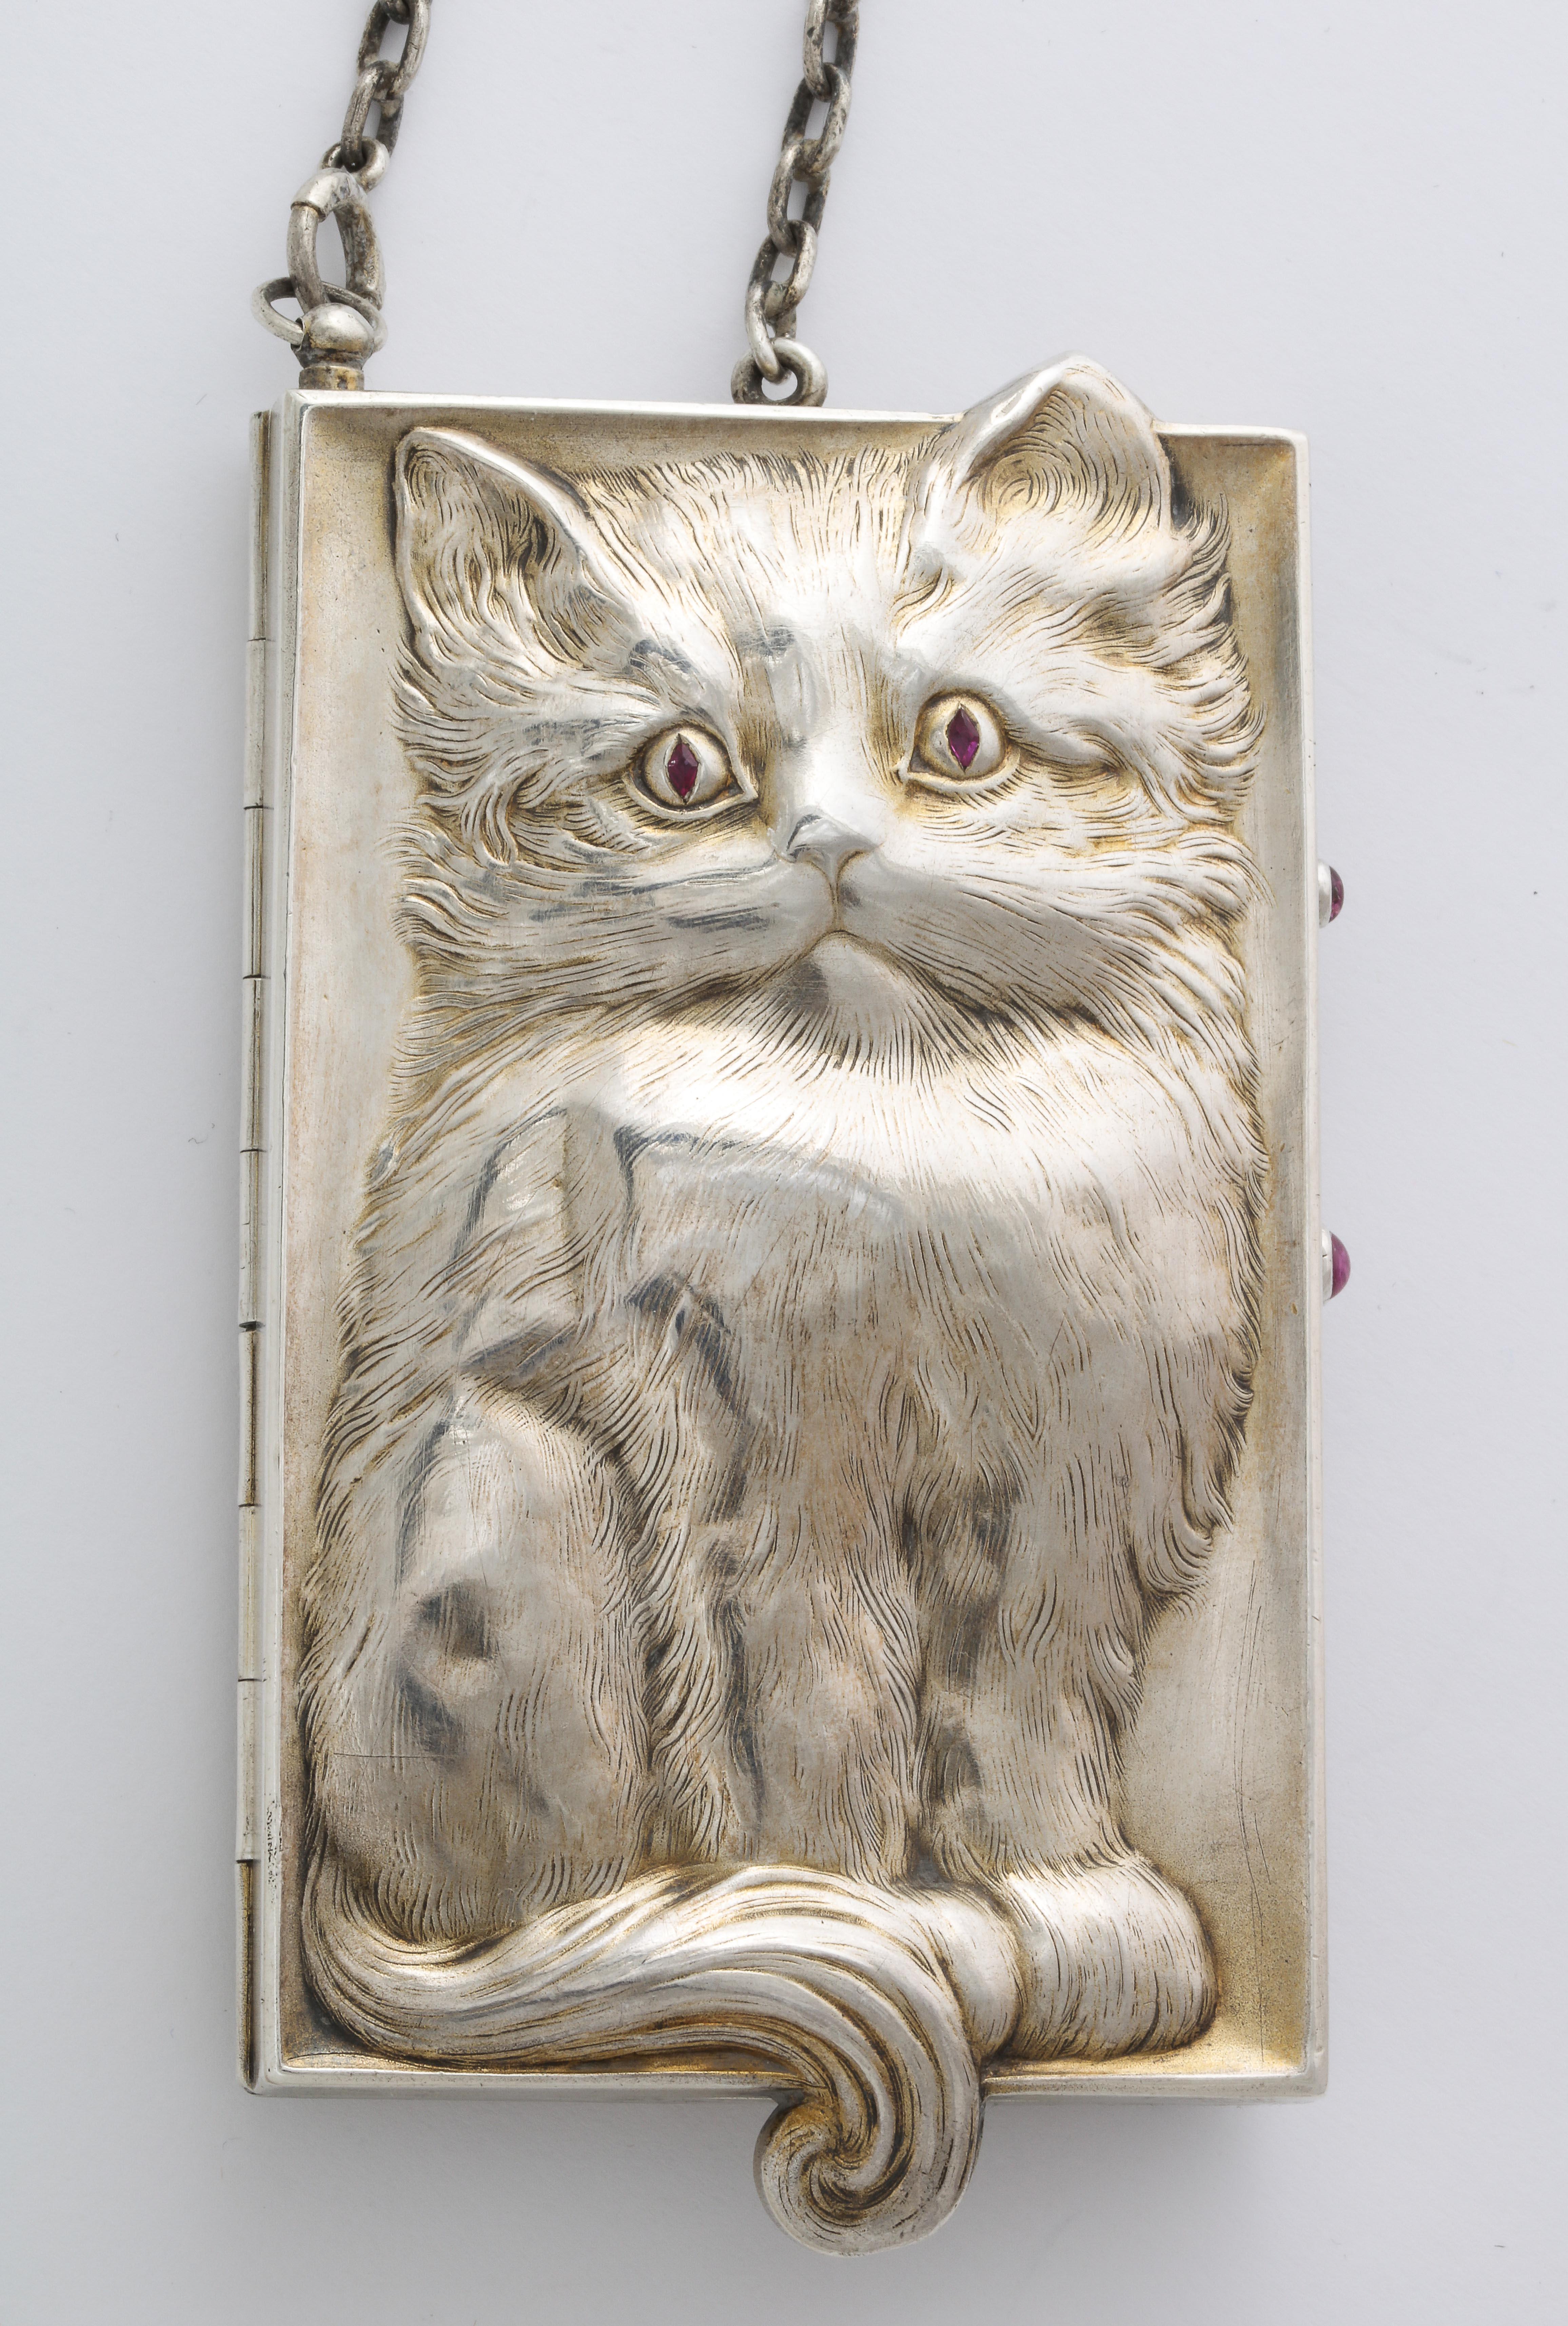 Detail and amusing nuance will endear this sterling silver compact to the hearts of cat lovers. Engraved so that the cat rises from the silver background, the front side shows the entire animal with its ruby eyes catching yours. Turn to the back and